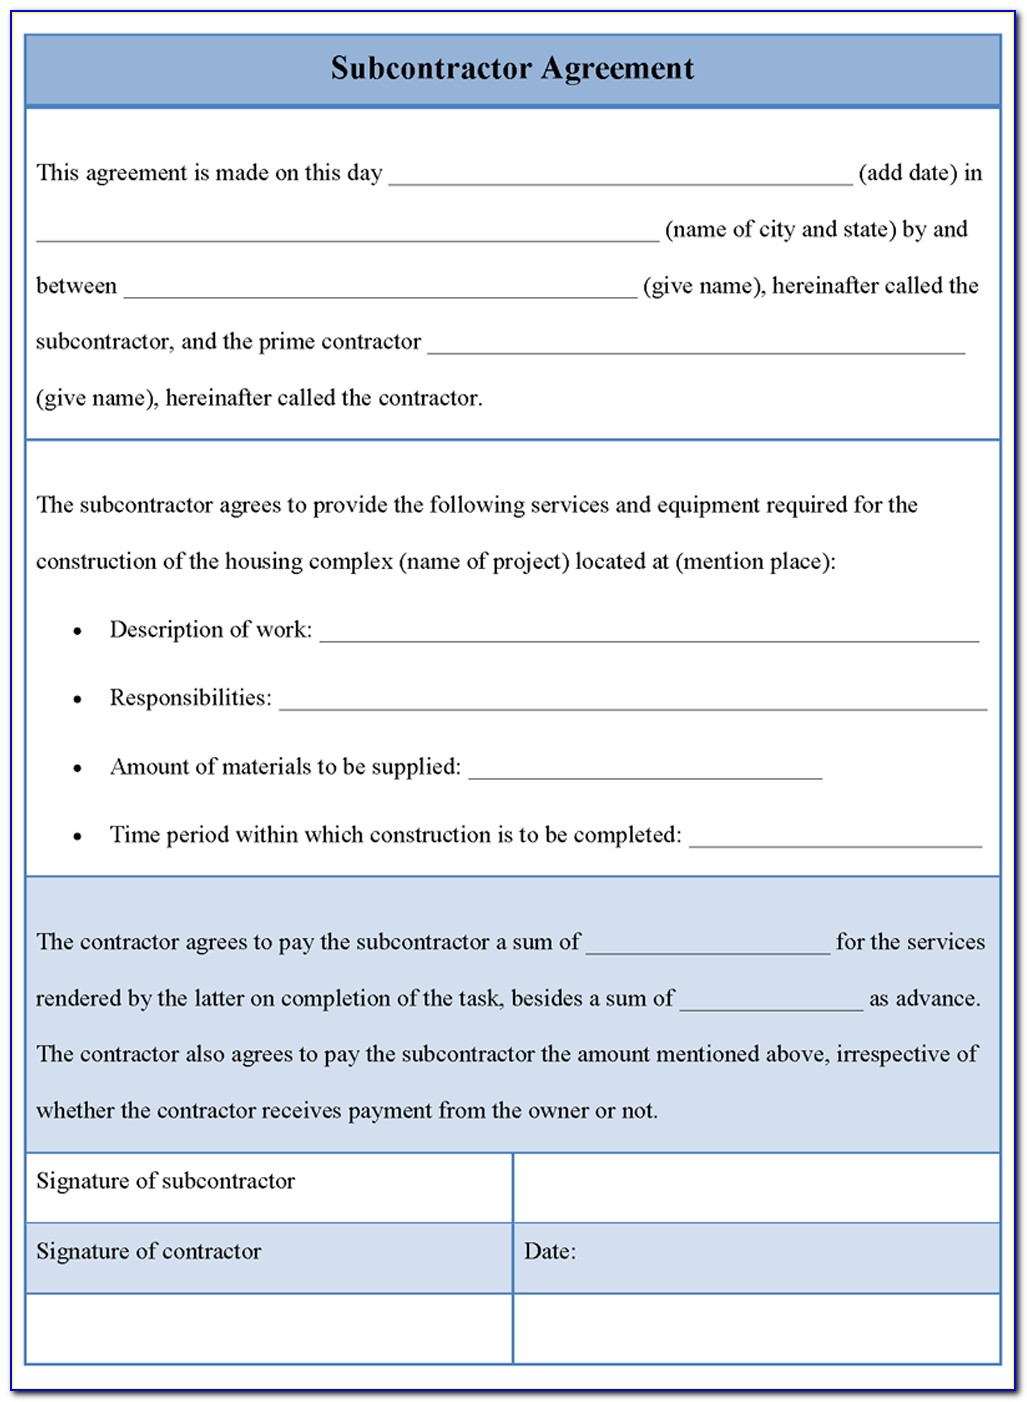 Subcontractor Agreement Forms